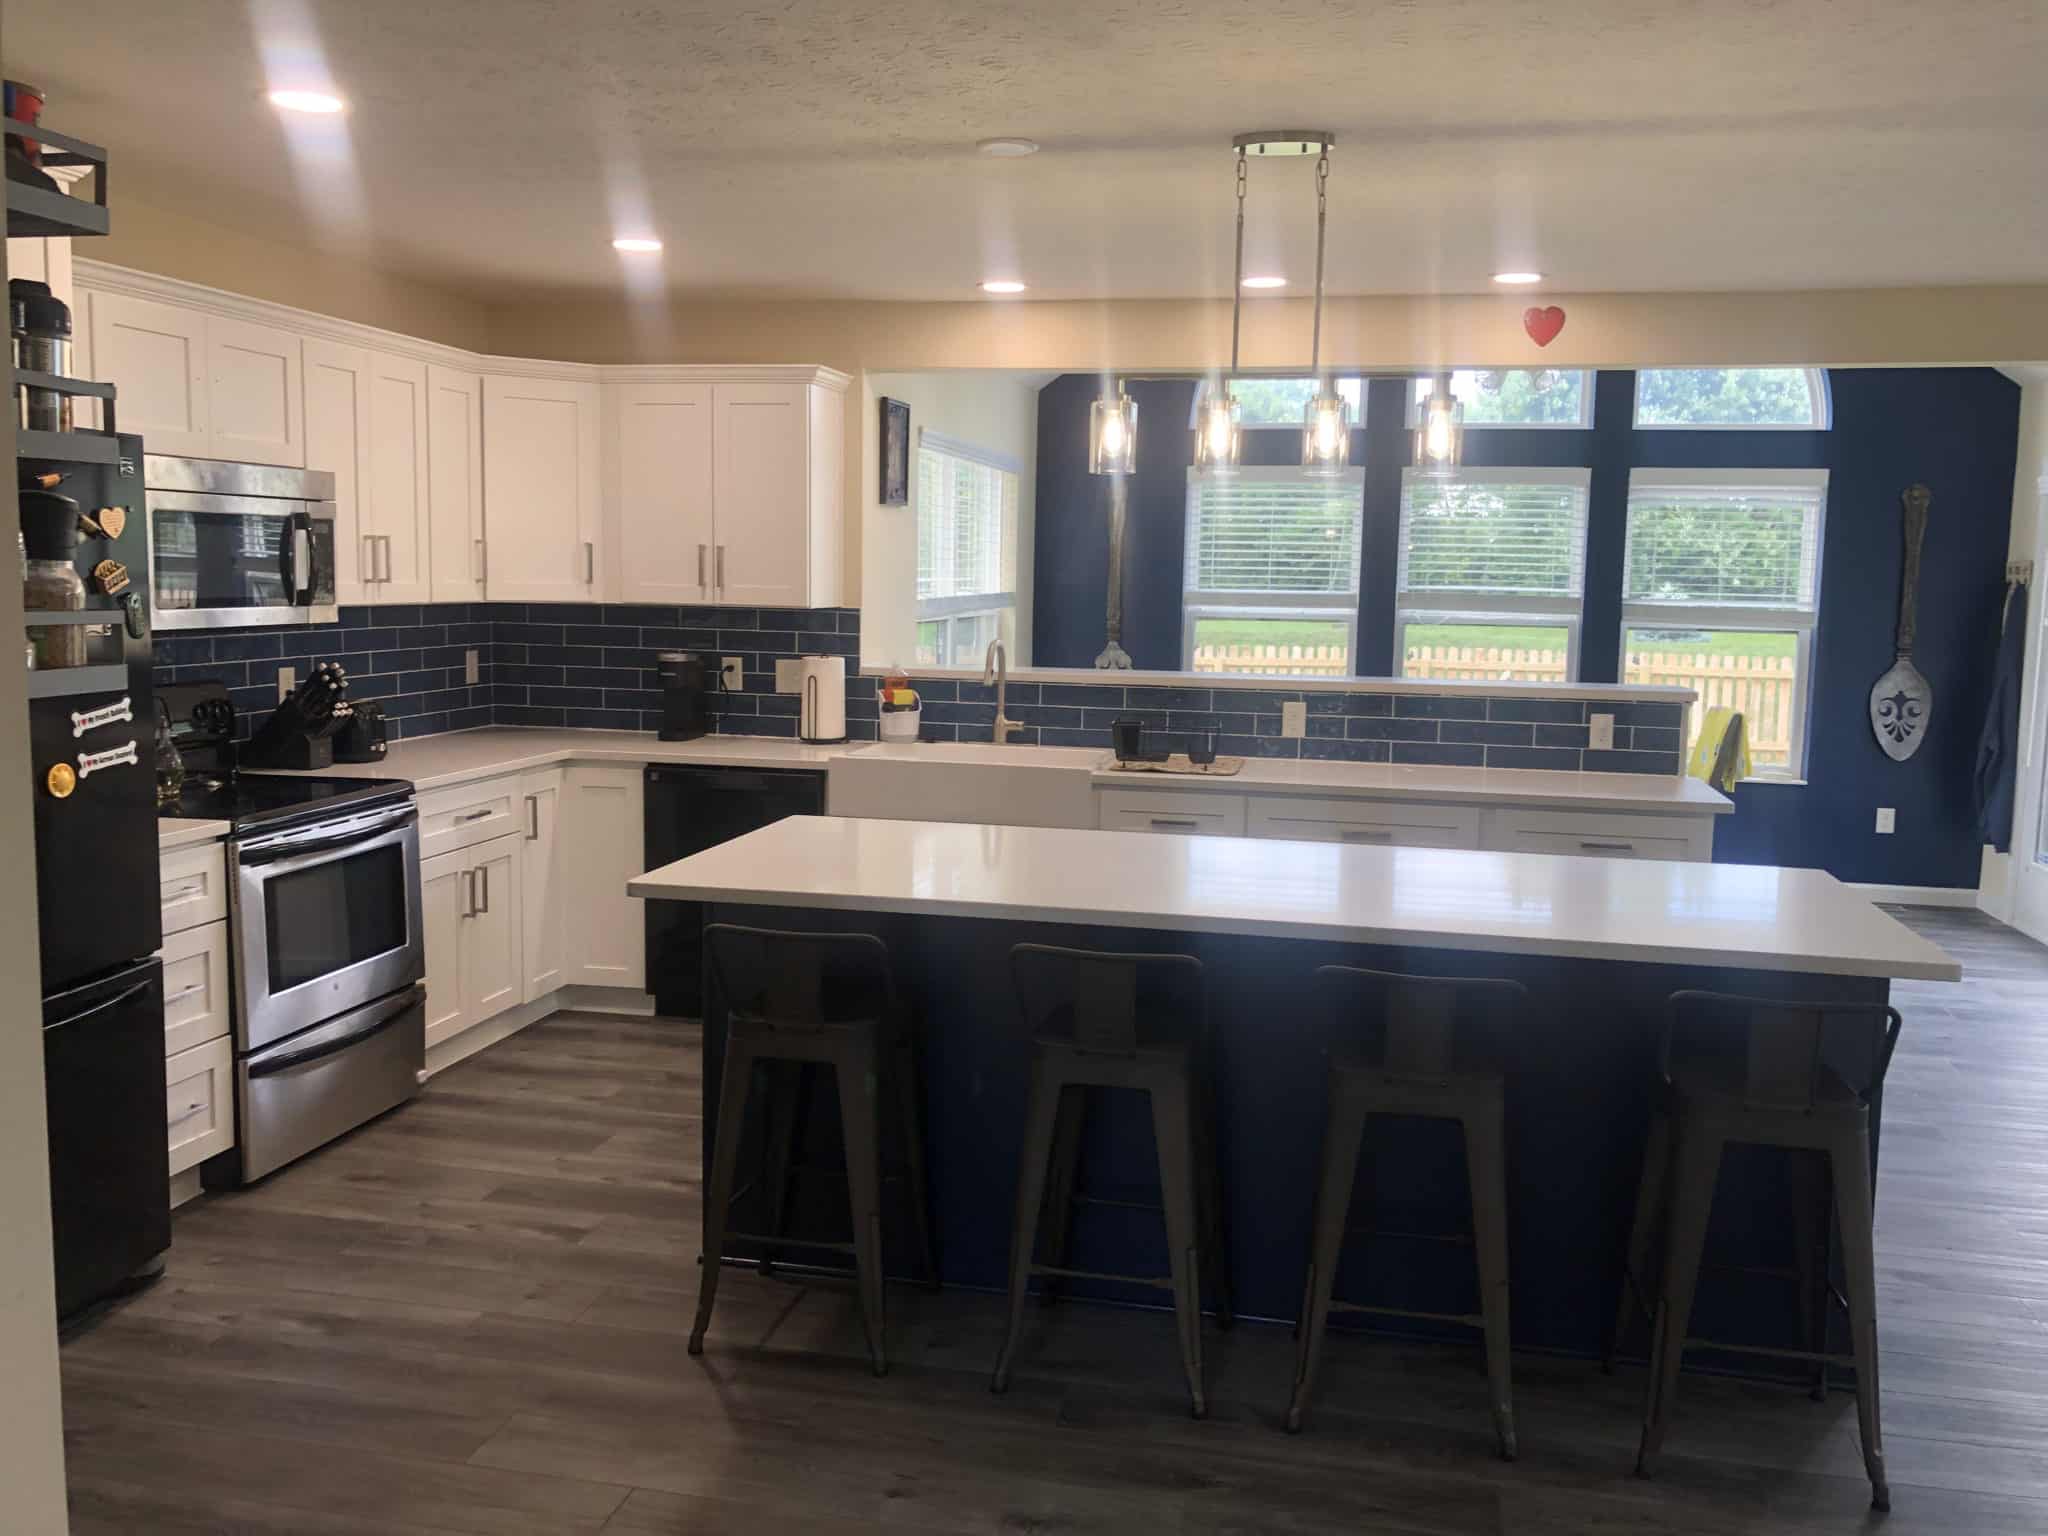 Complete Kitchen Remodeling Services in Springboro, OH